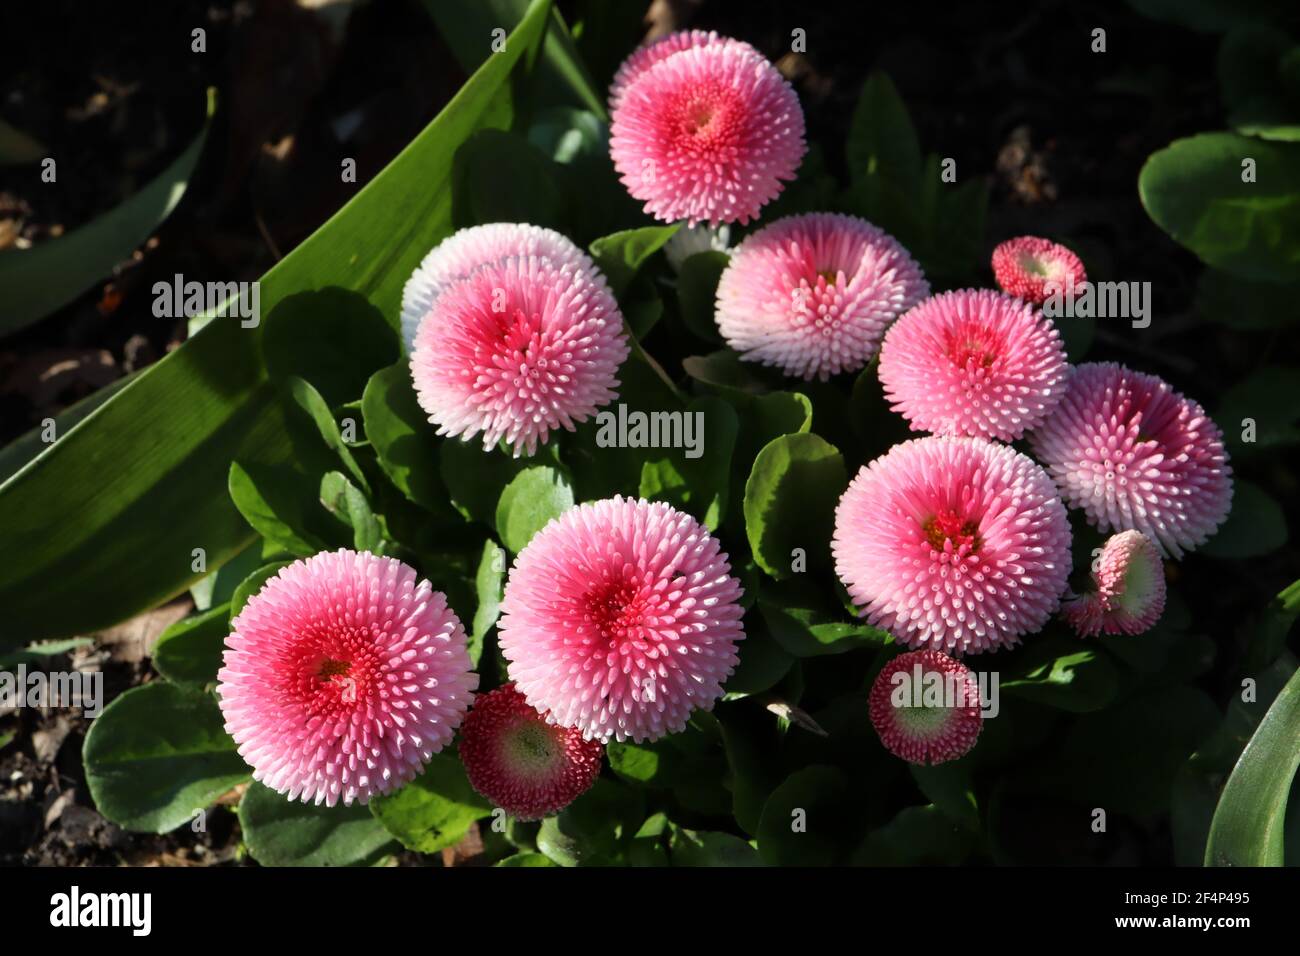 Bellis perennis pomponette ‘Bellissima Rose Bicolor’ Bellis bicolor – pink and white round flowers with tightly quilled petals, March, England, UK Stock Photo